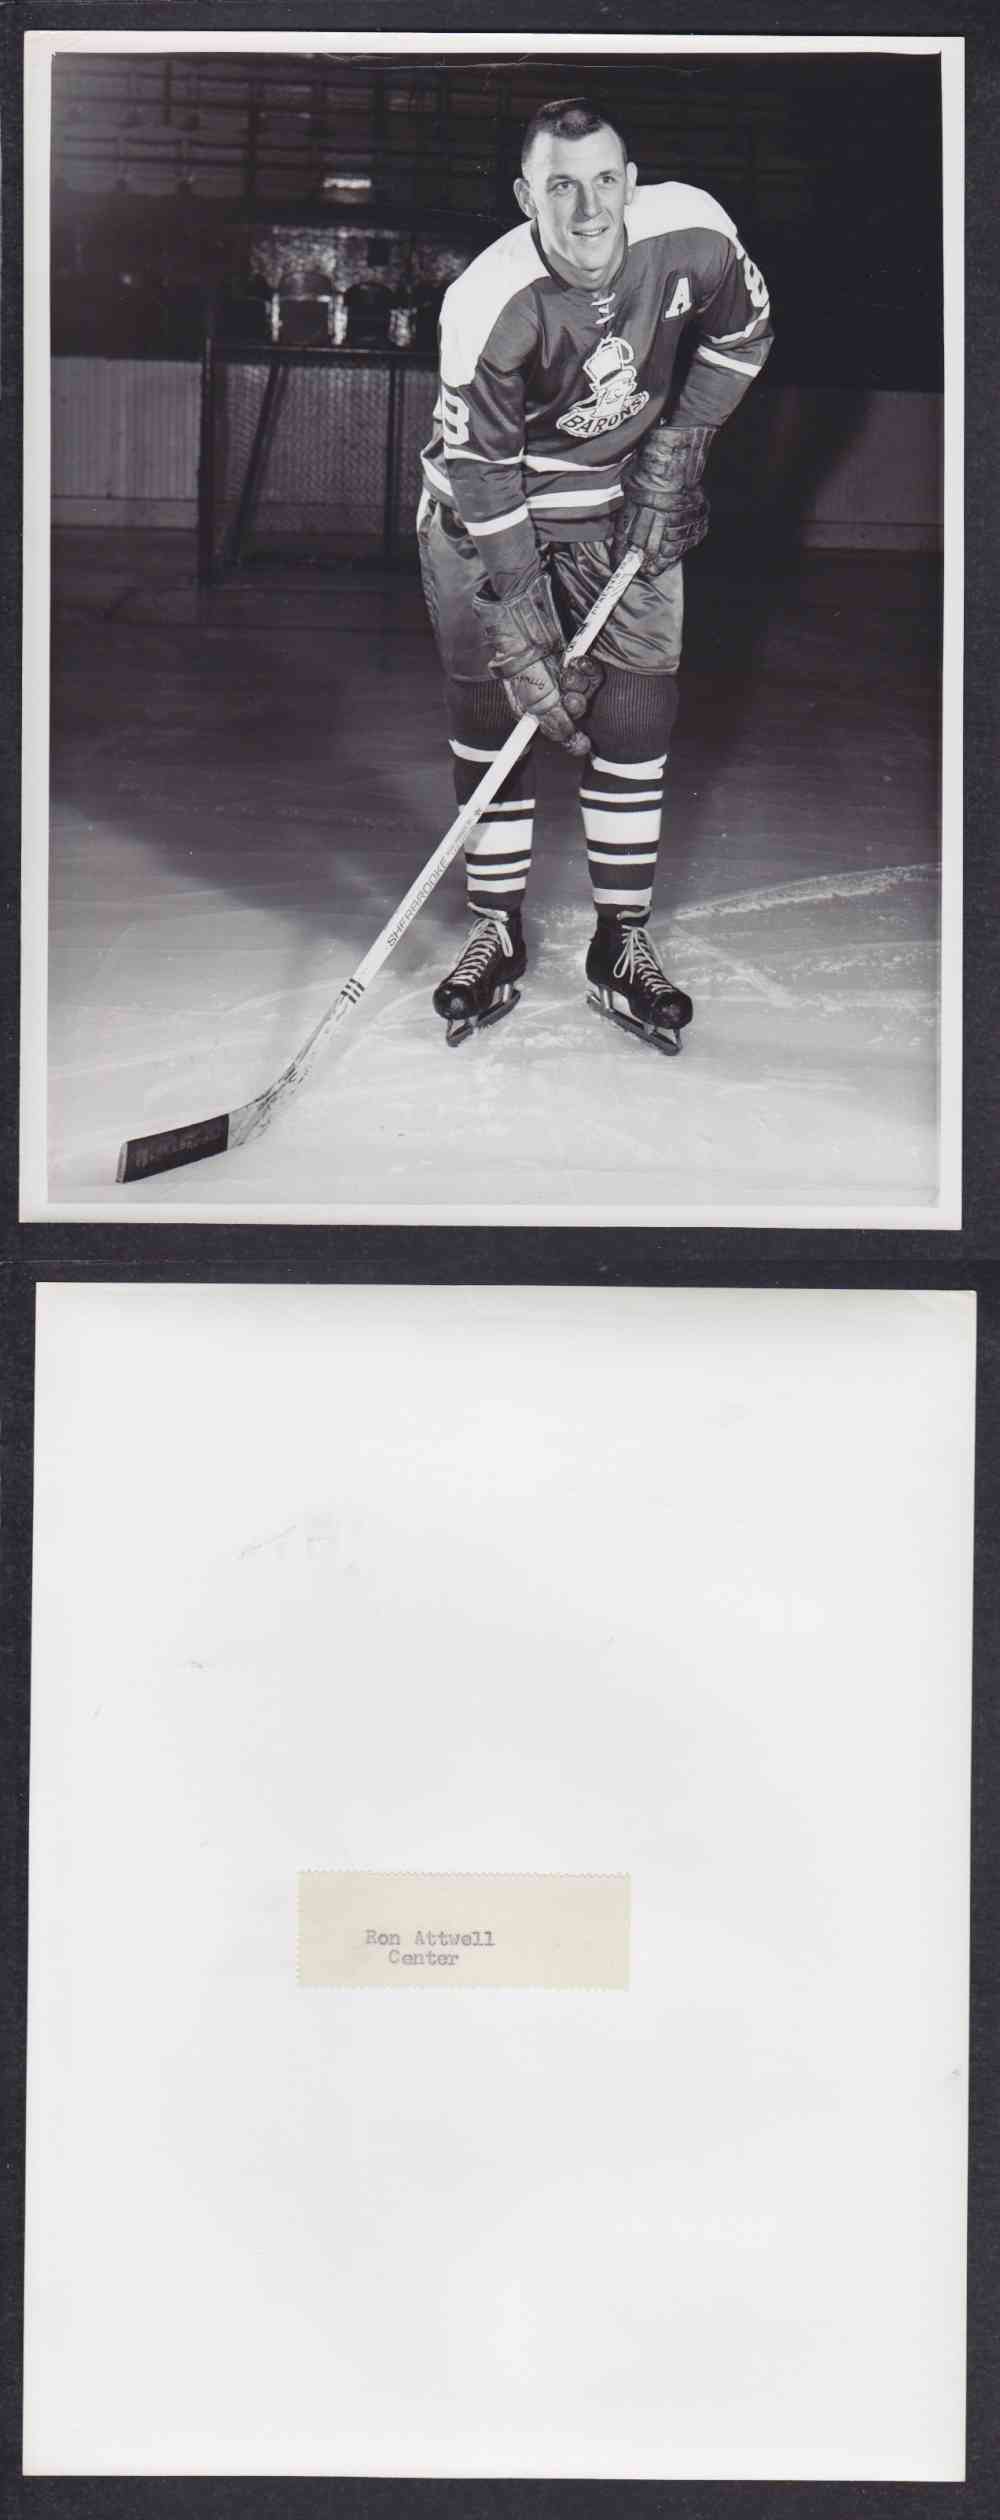 1960'S CLEVELAND BARONS PHOTO R. ATTWELL photo